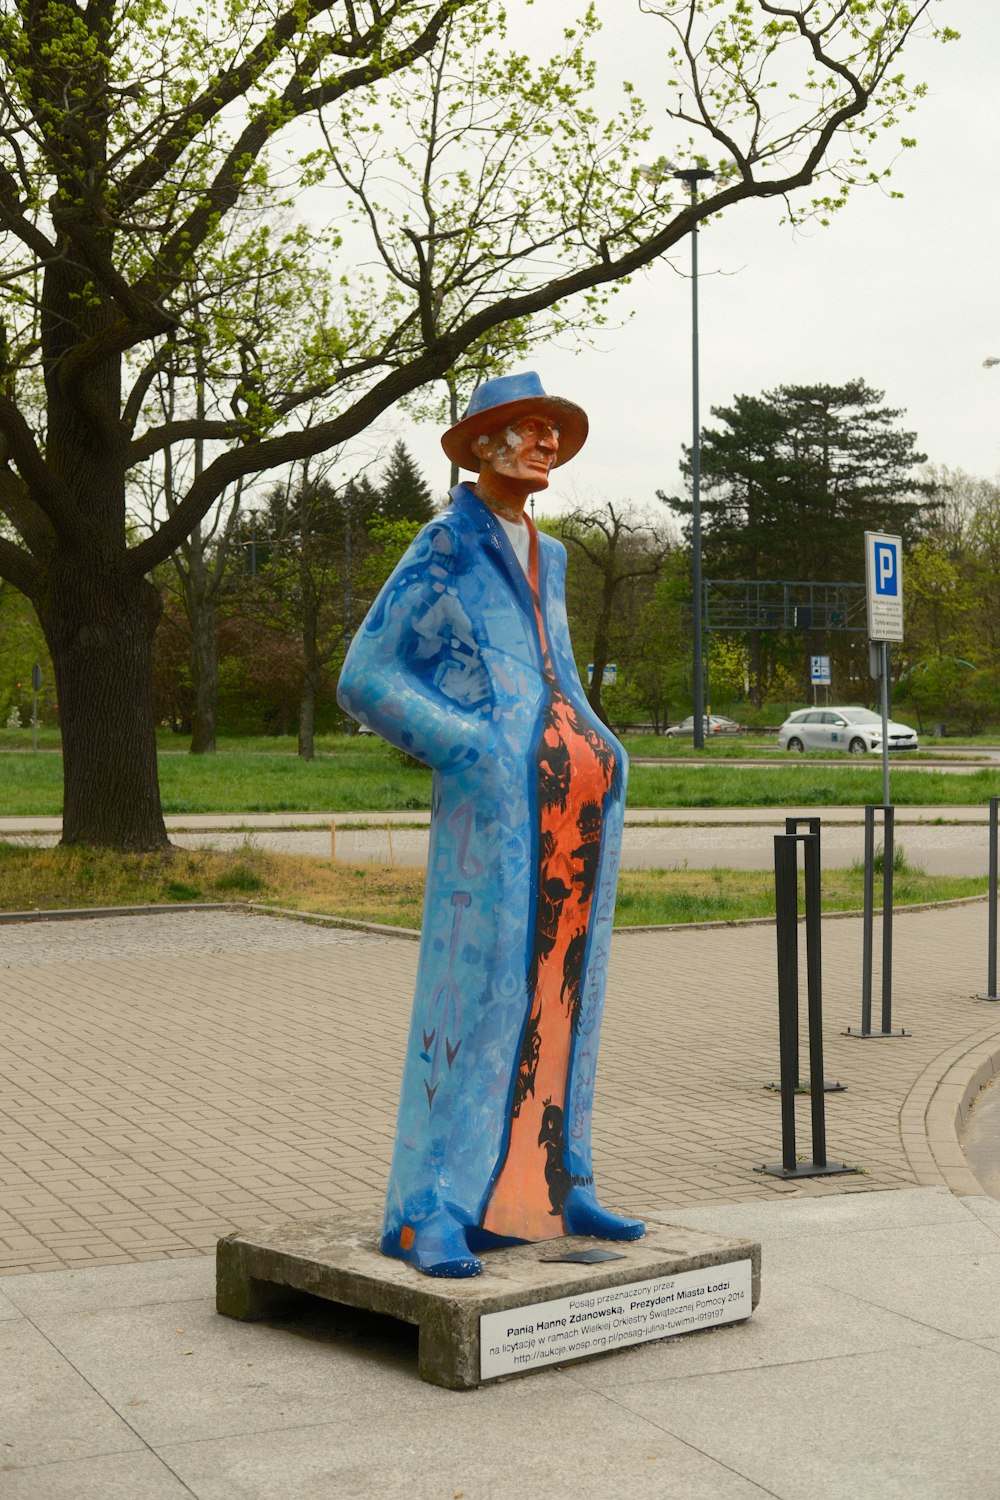 a statue of a man in a blue suit and hat